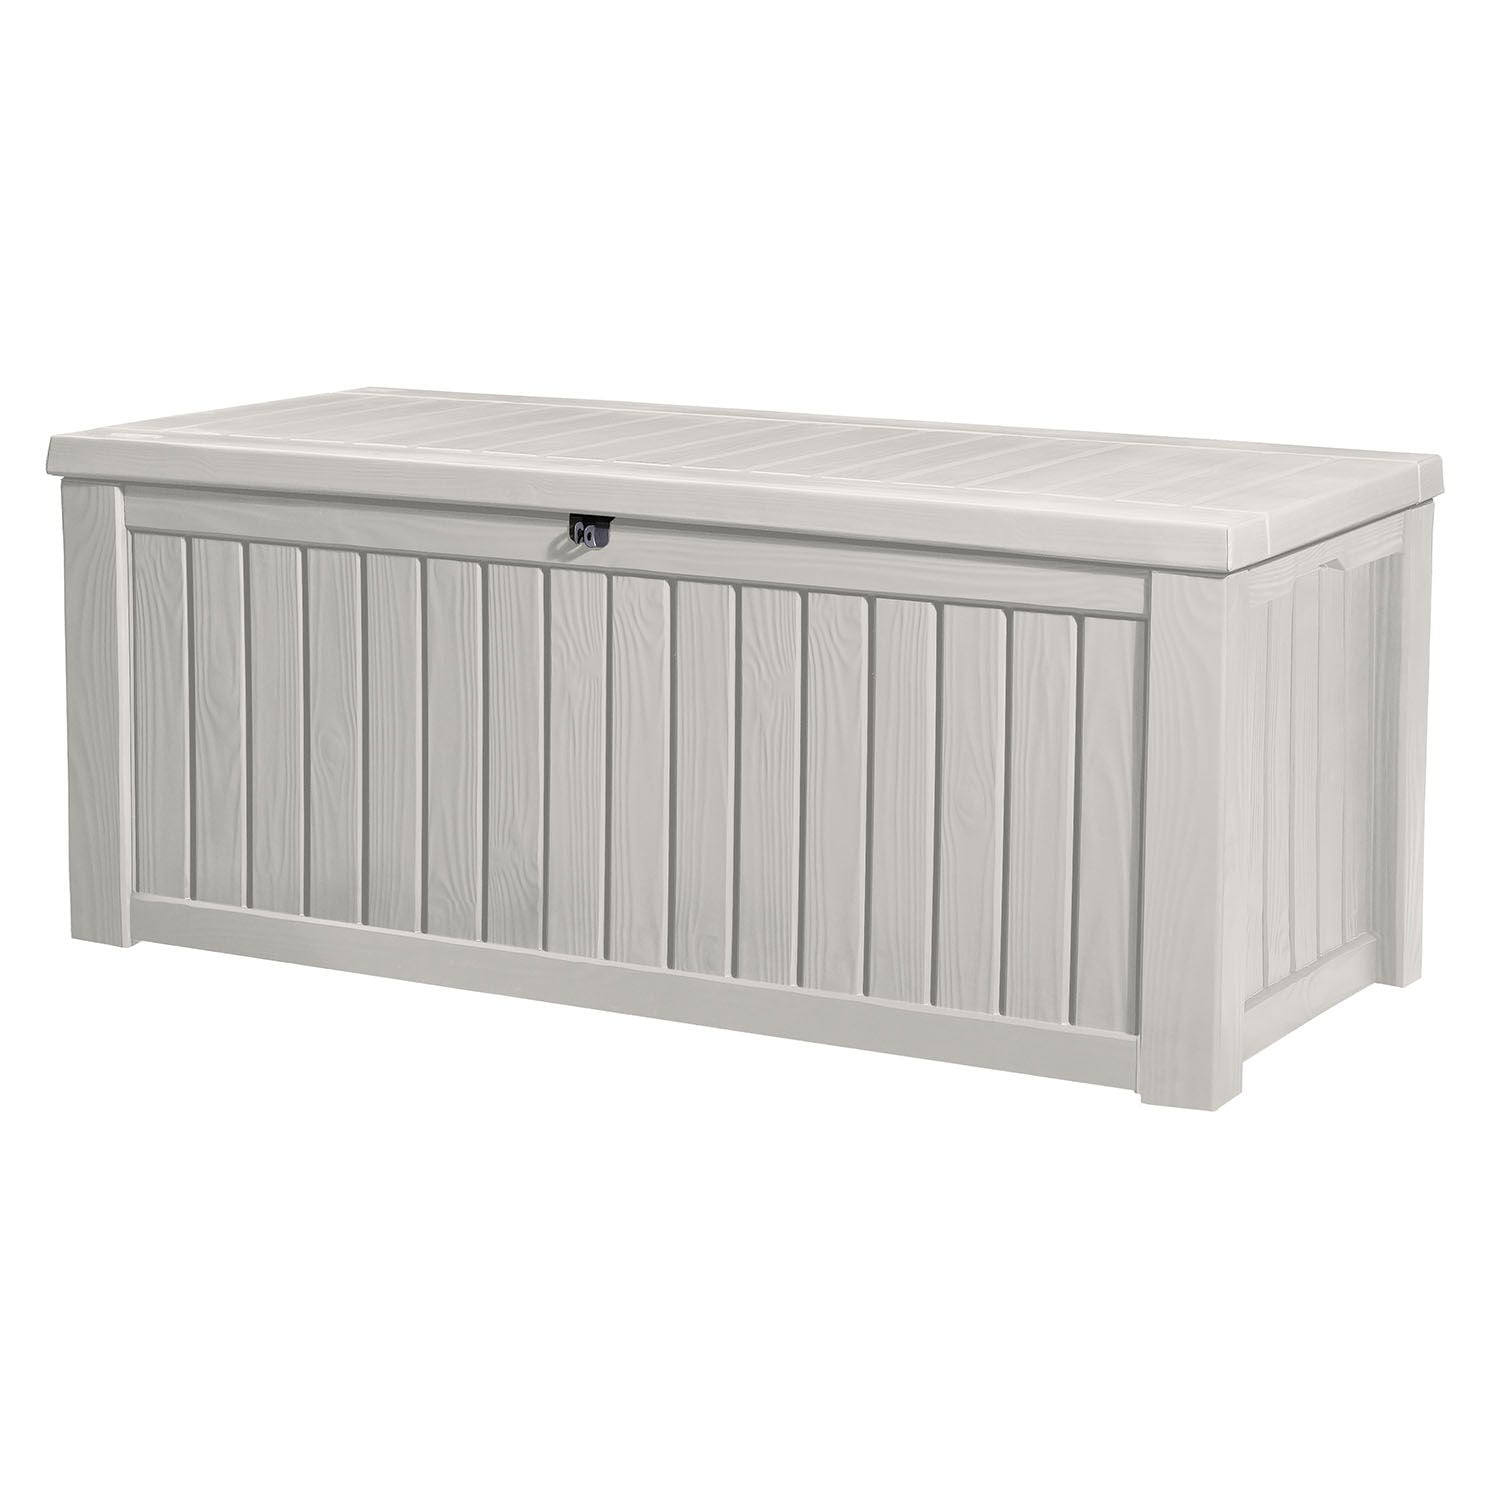 outdoor deck storage boxes - quality plastic sheds